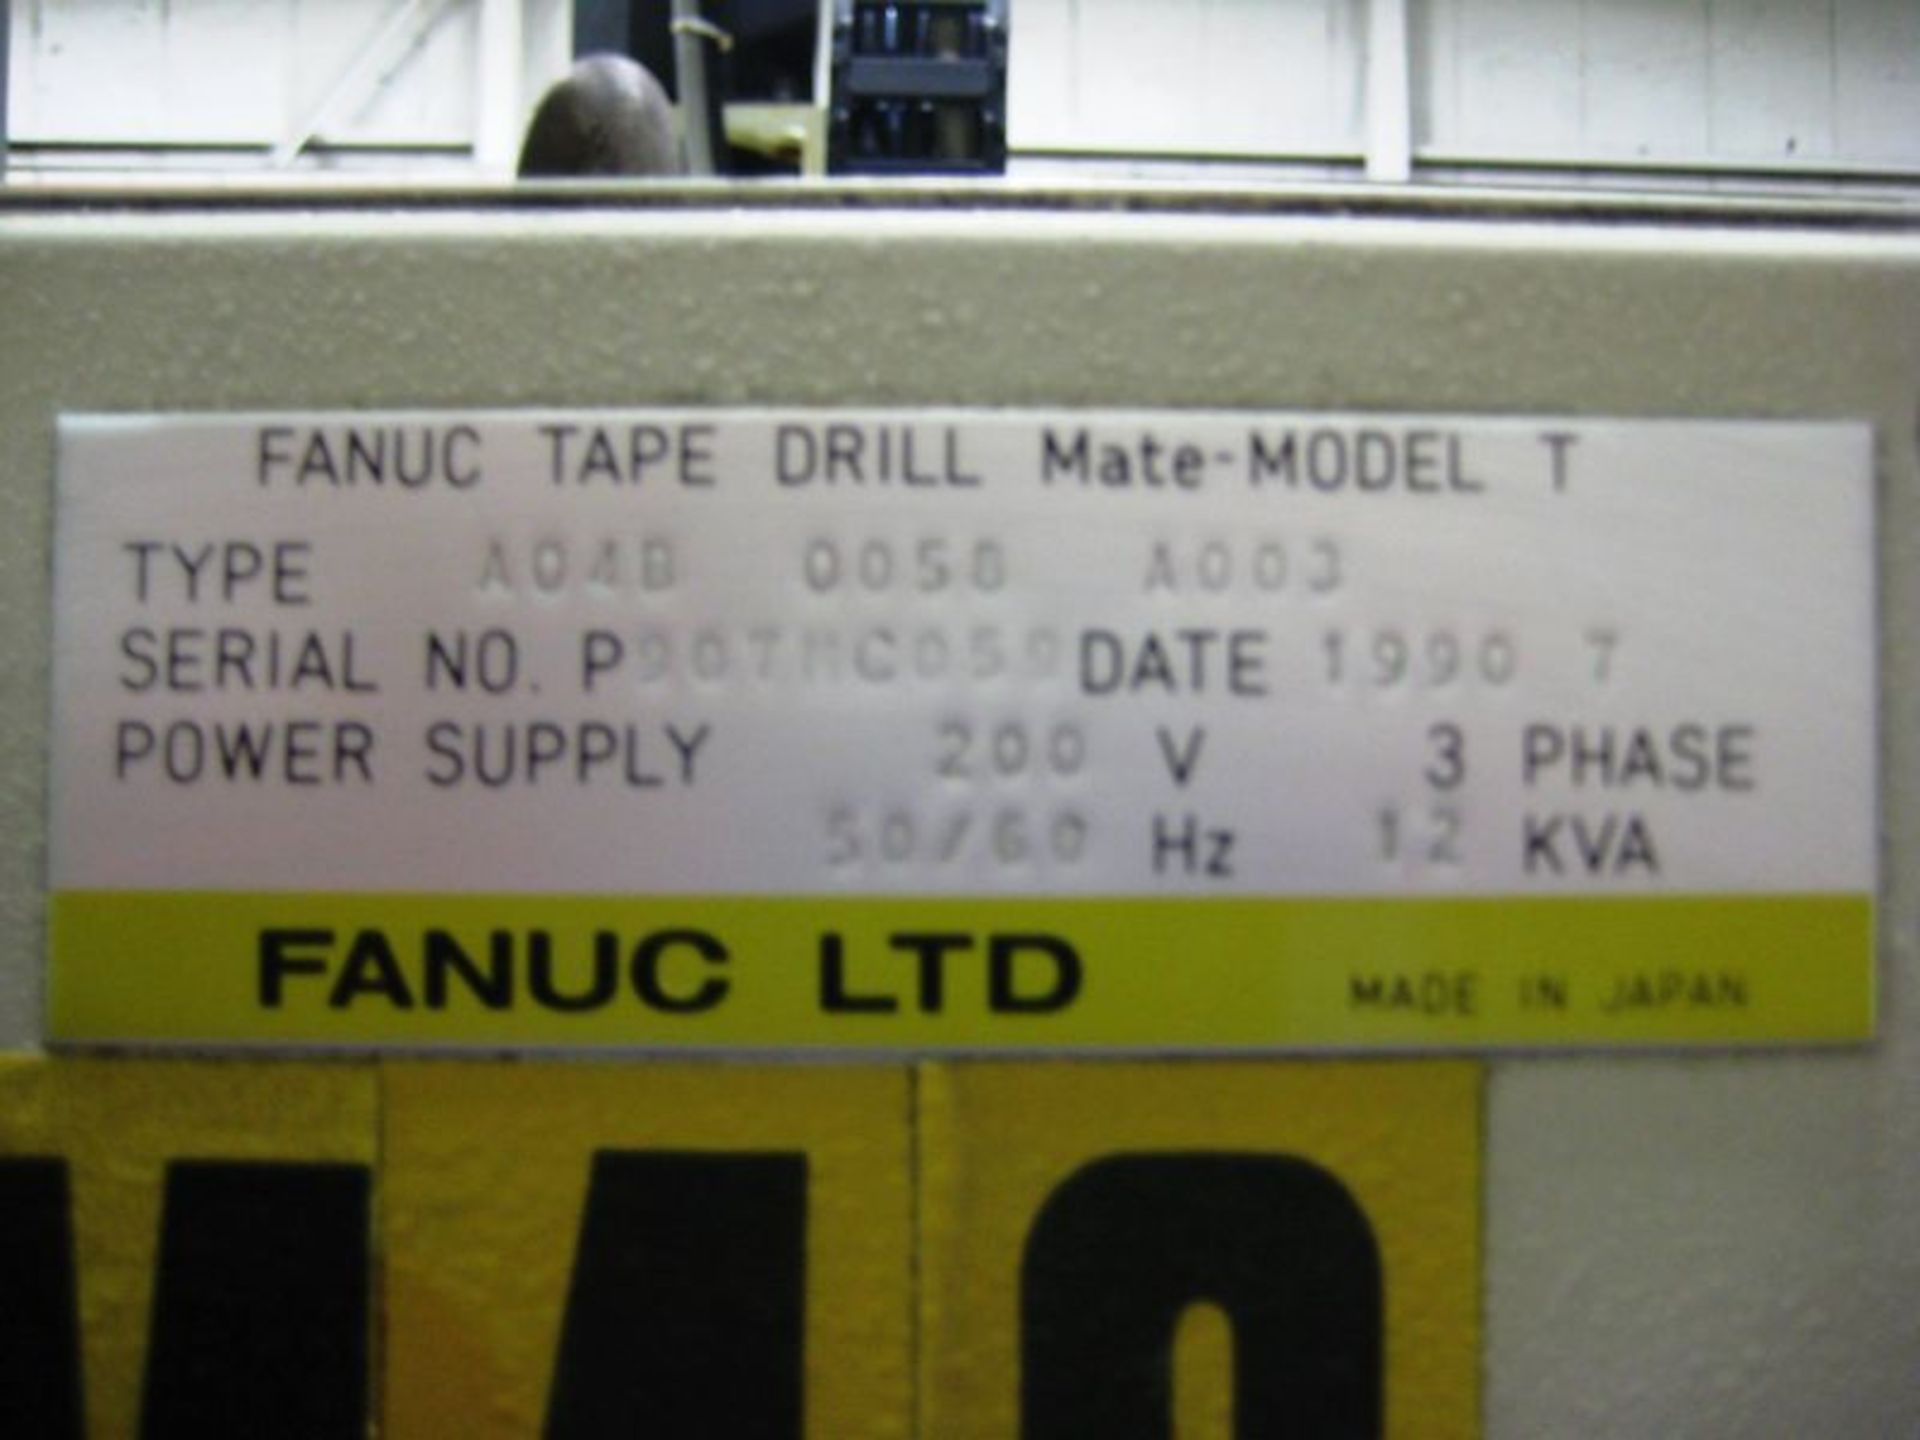 Fanuc Alpha T10A CNC Drill Tap Vertical Machining Center, S/N PQ07MCO59, NEW 1991 General - Image 6 of 8